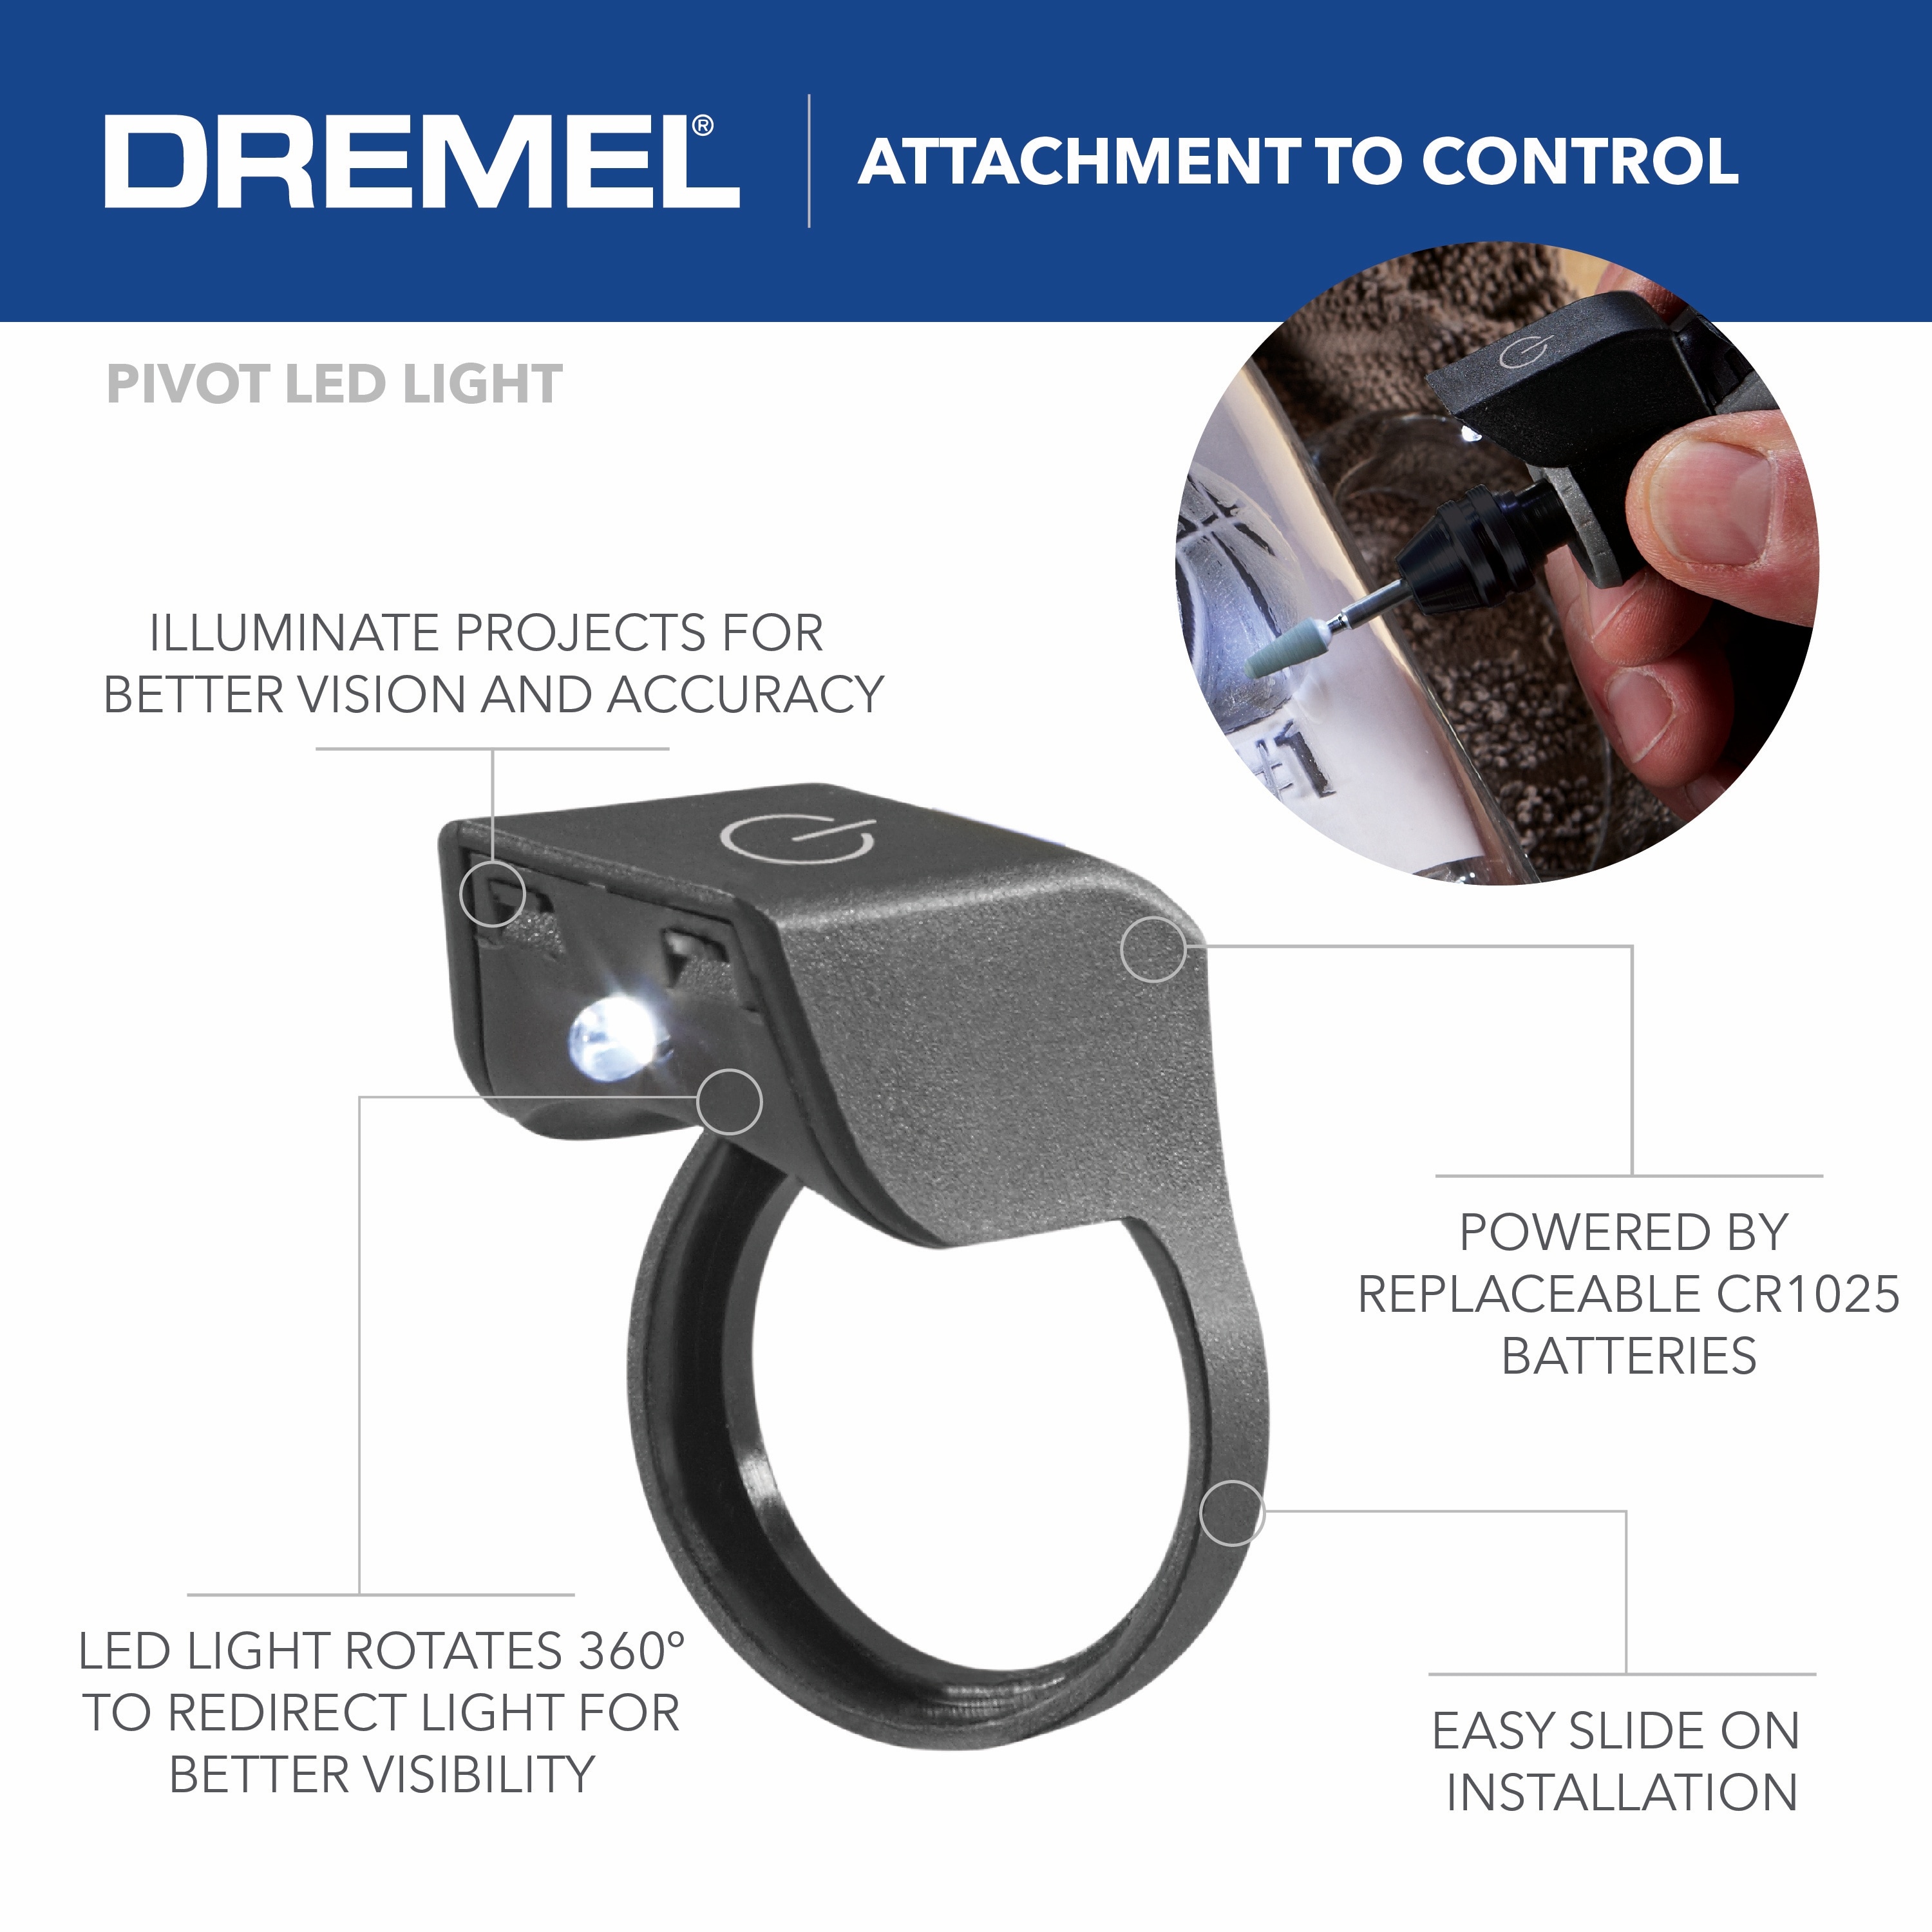 Dremel 4300 (4300-3/45Ez) Rotary Tool Kit With 3 Attachments, 45  Accessories And Front Led Light, Variable Speed 5000-35000Rpm For Cutting,  Carving, Cleaning, Sanding, Engraving, Grinding price in UAE,  UAE